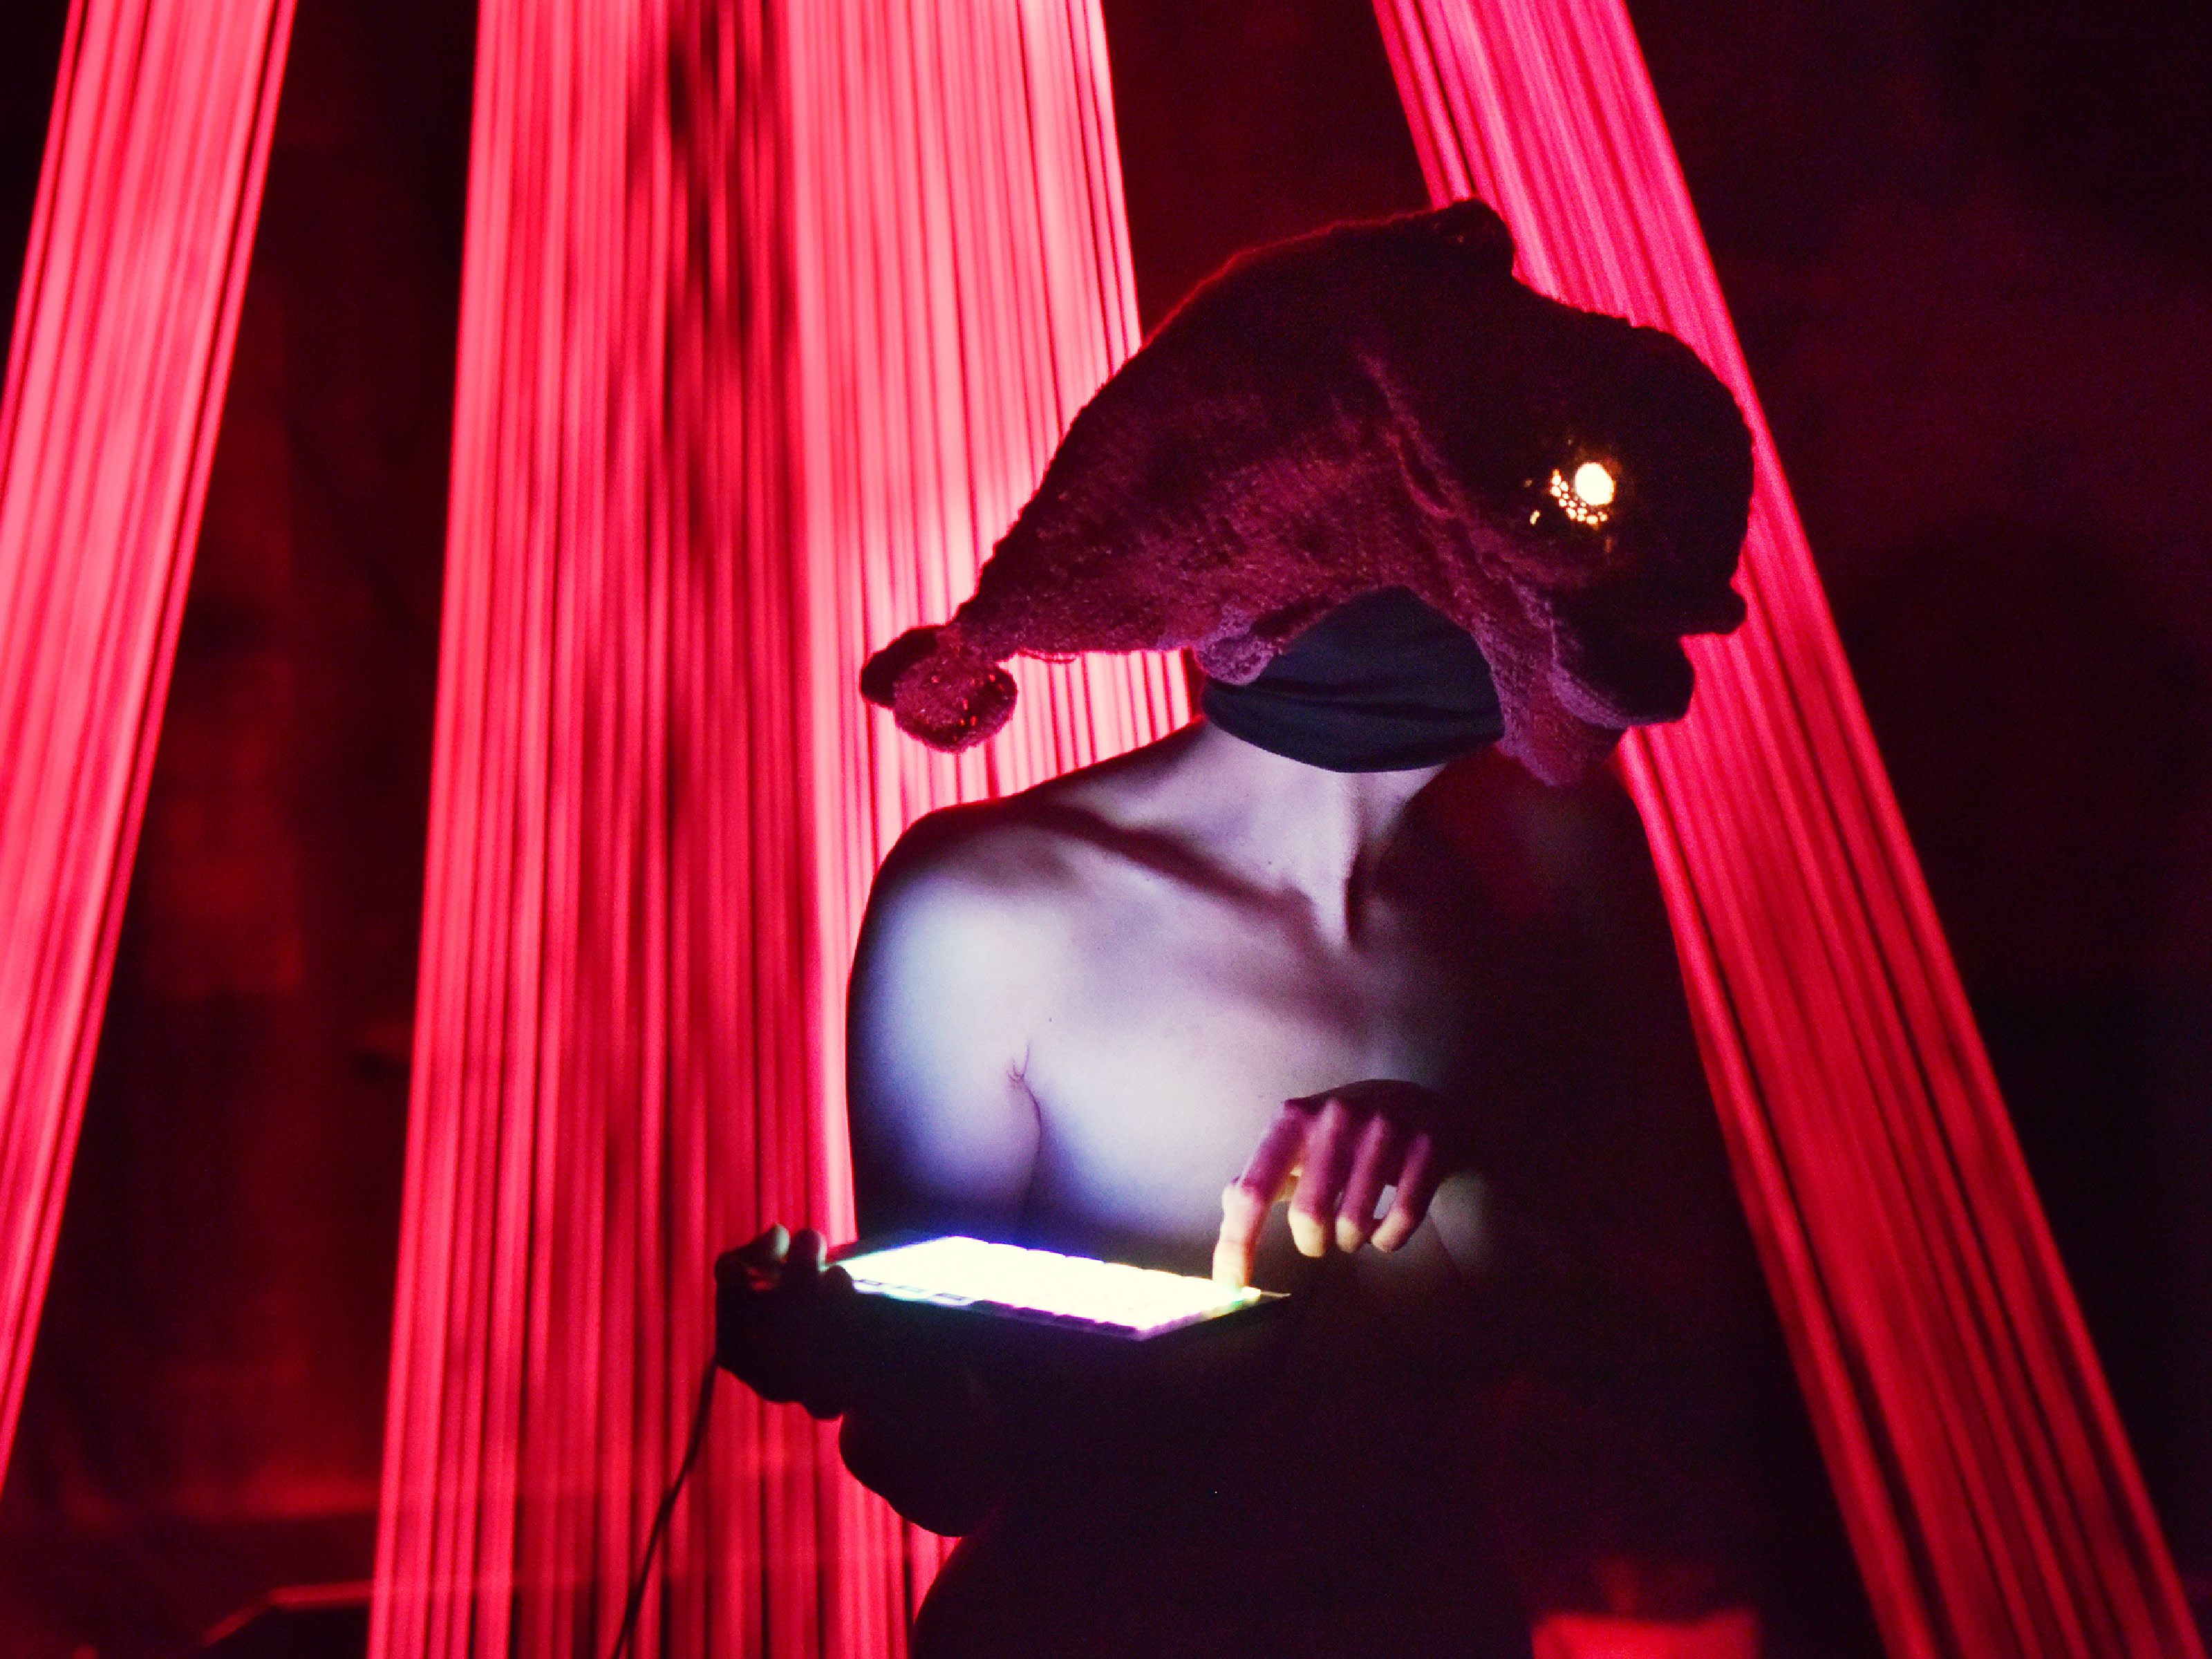 A naked performer wears a crocheted fish on her head, which has a glowing lamp eye. Her face is completely covered by the fish and a black mask. She presses down one of the luminous buttons of an electronic device.